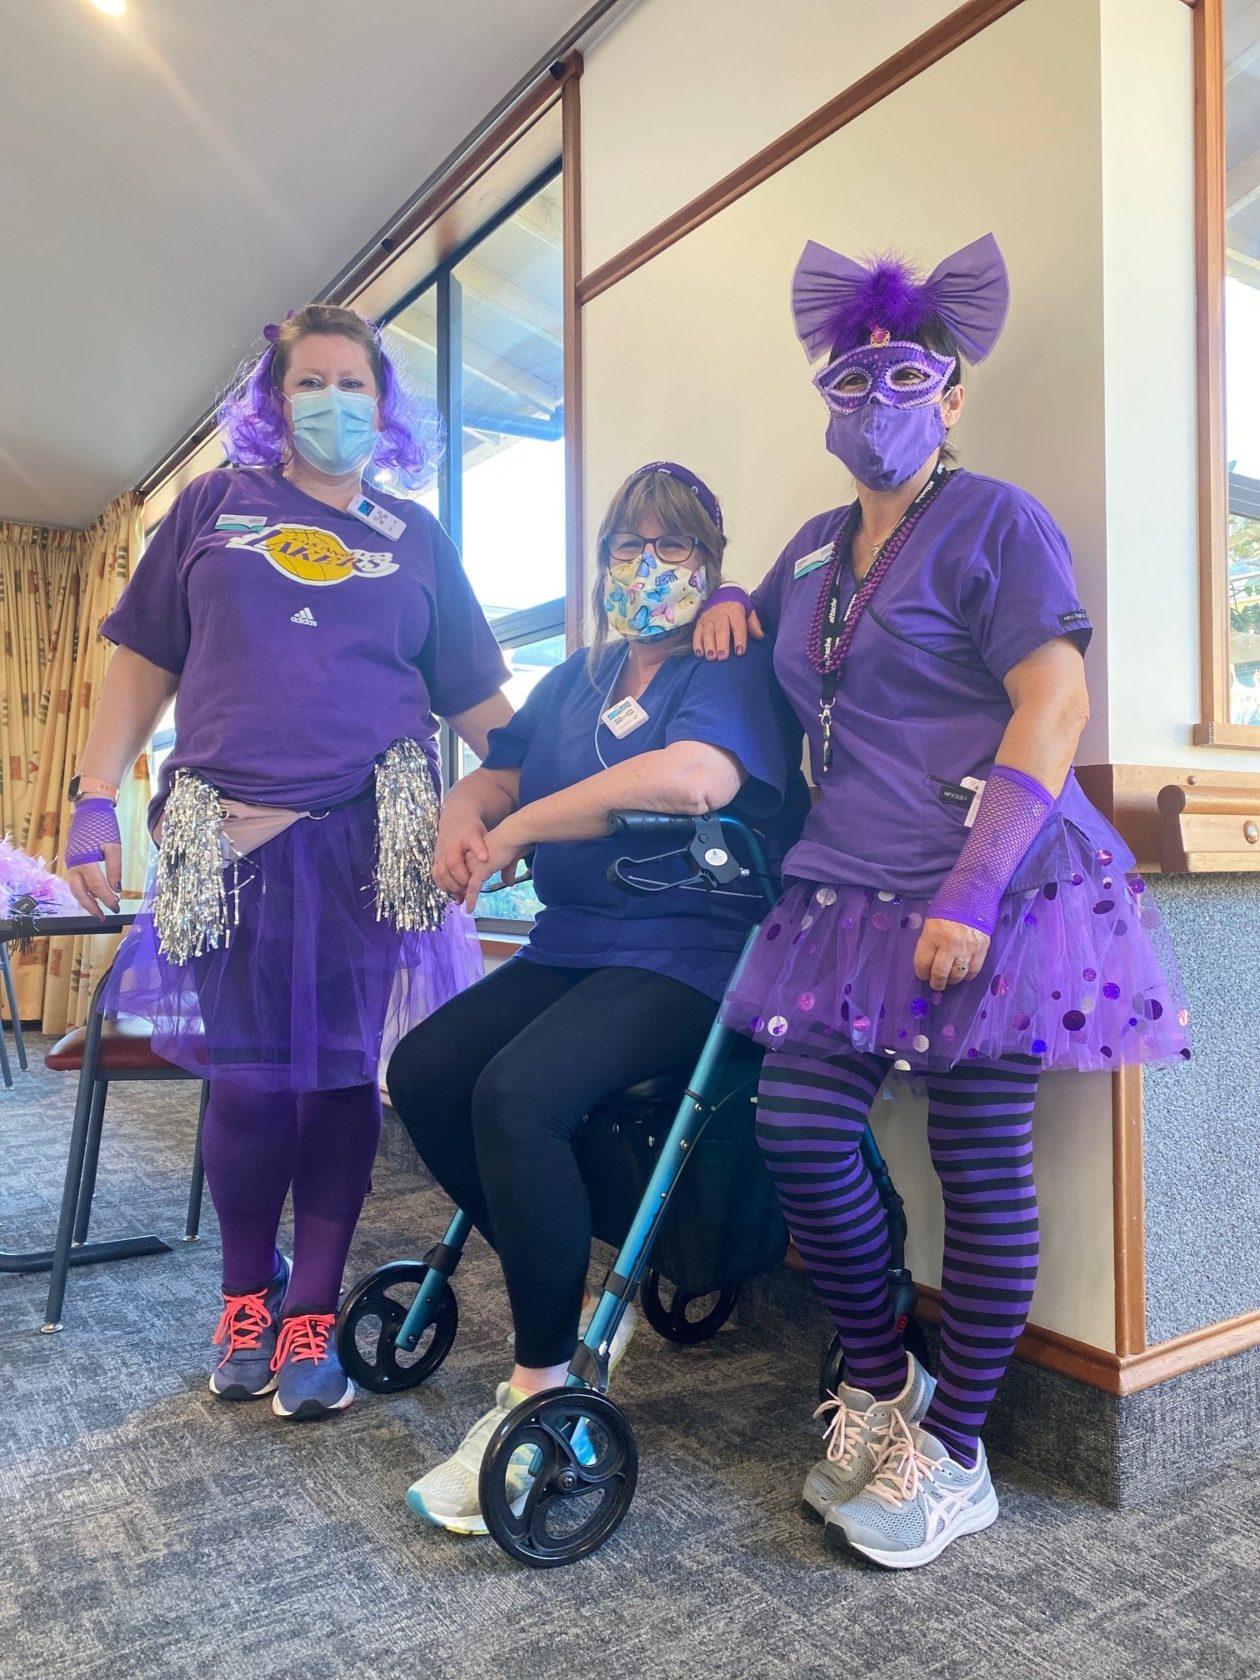 3 staff members from the Croft rest home dressed up in purple costumes pose for a photo